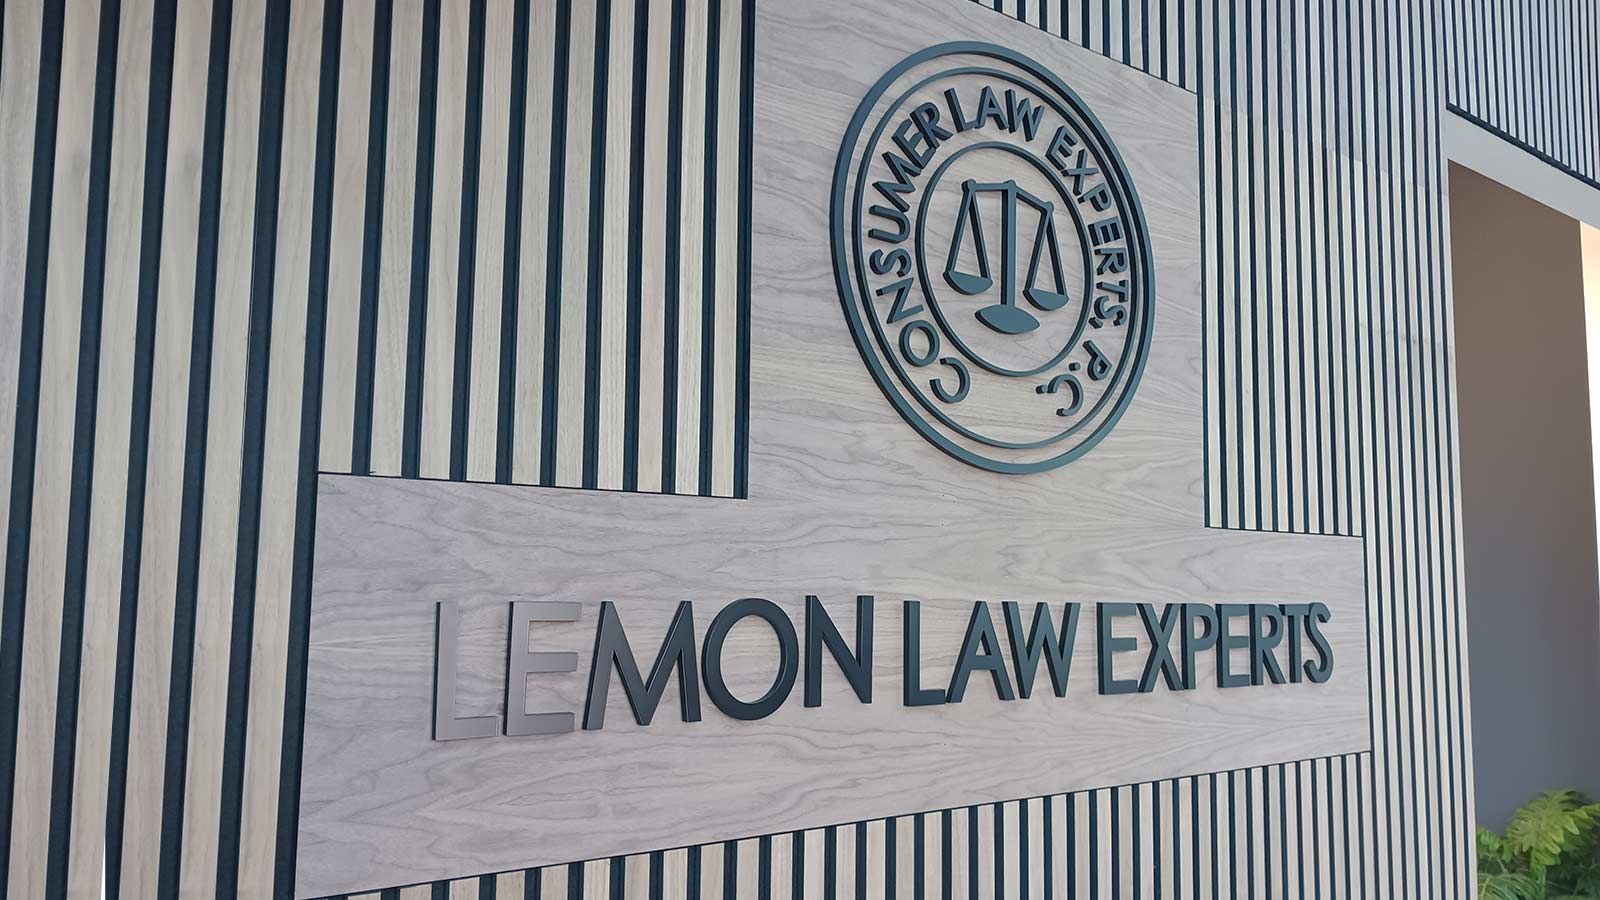 Lemon Law Experts office sign attached to the wall